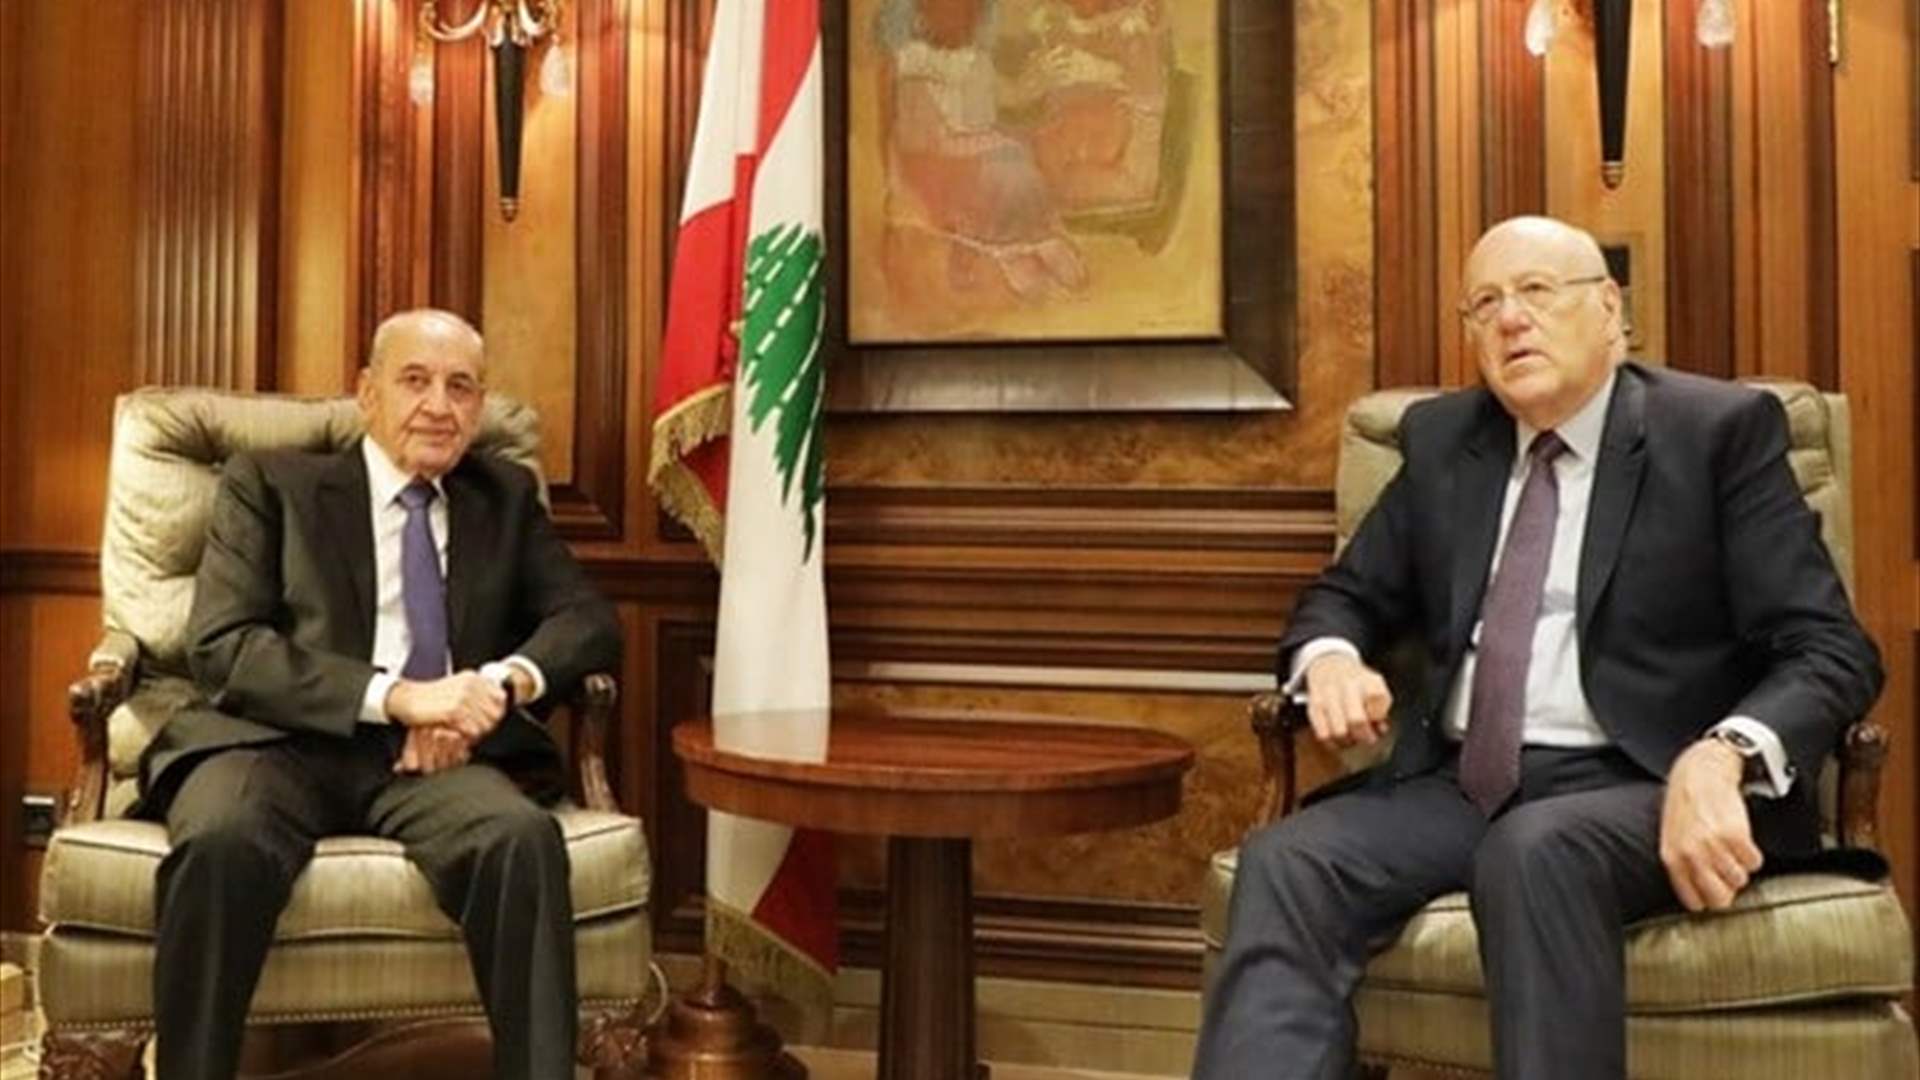 Mikati after meeting Berri: We have reached an extremely challenging phase, and our economy is turning into a cash-based economy